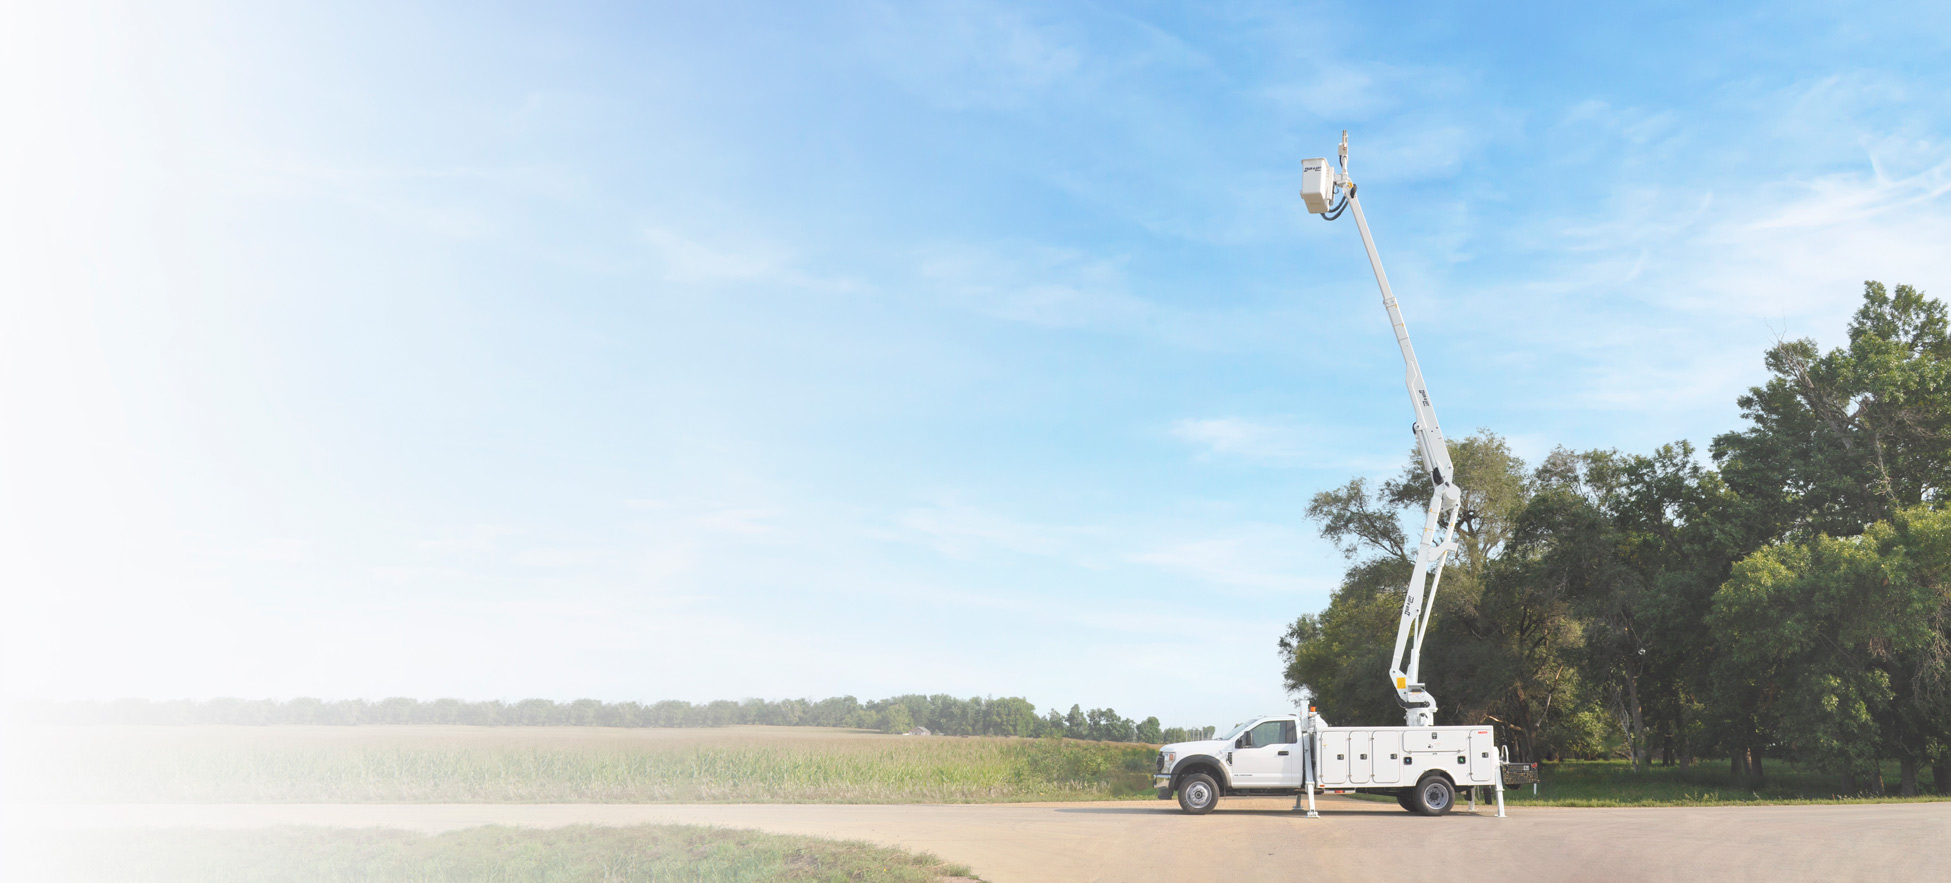 A DPM2-52 bucket truck on display in front of a field.